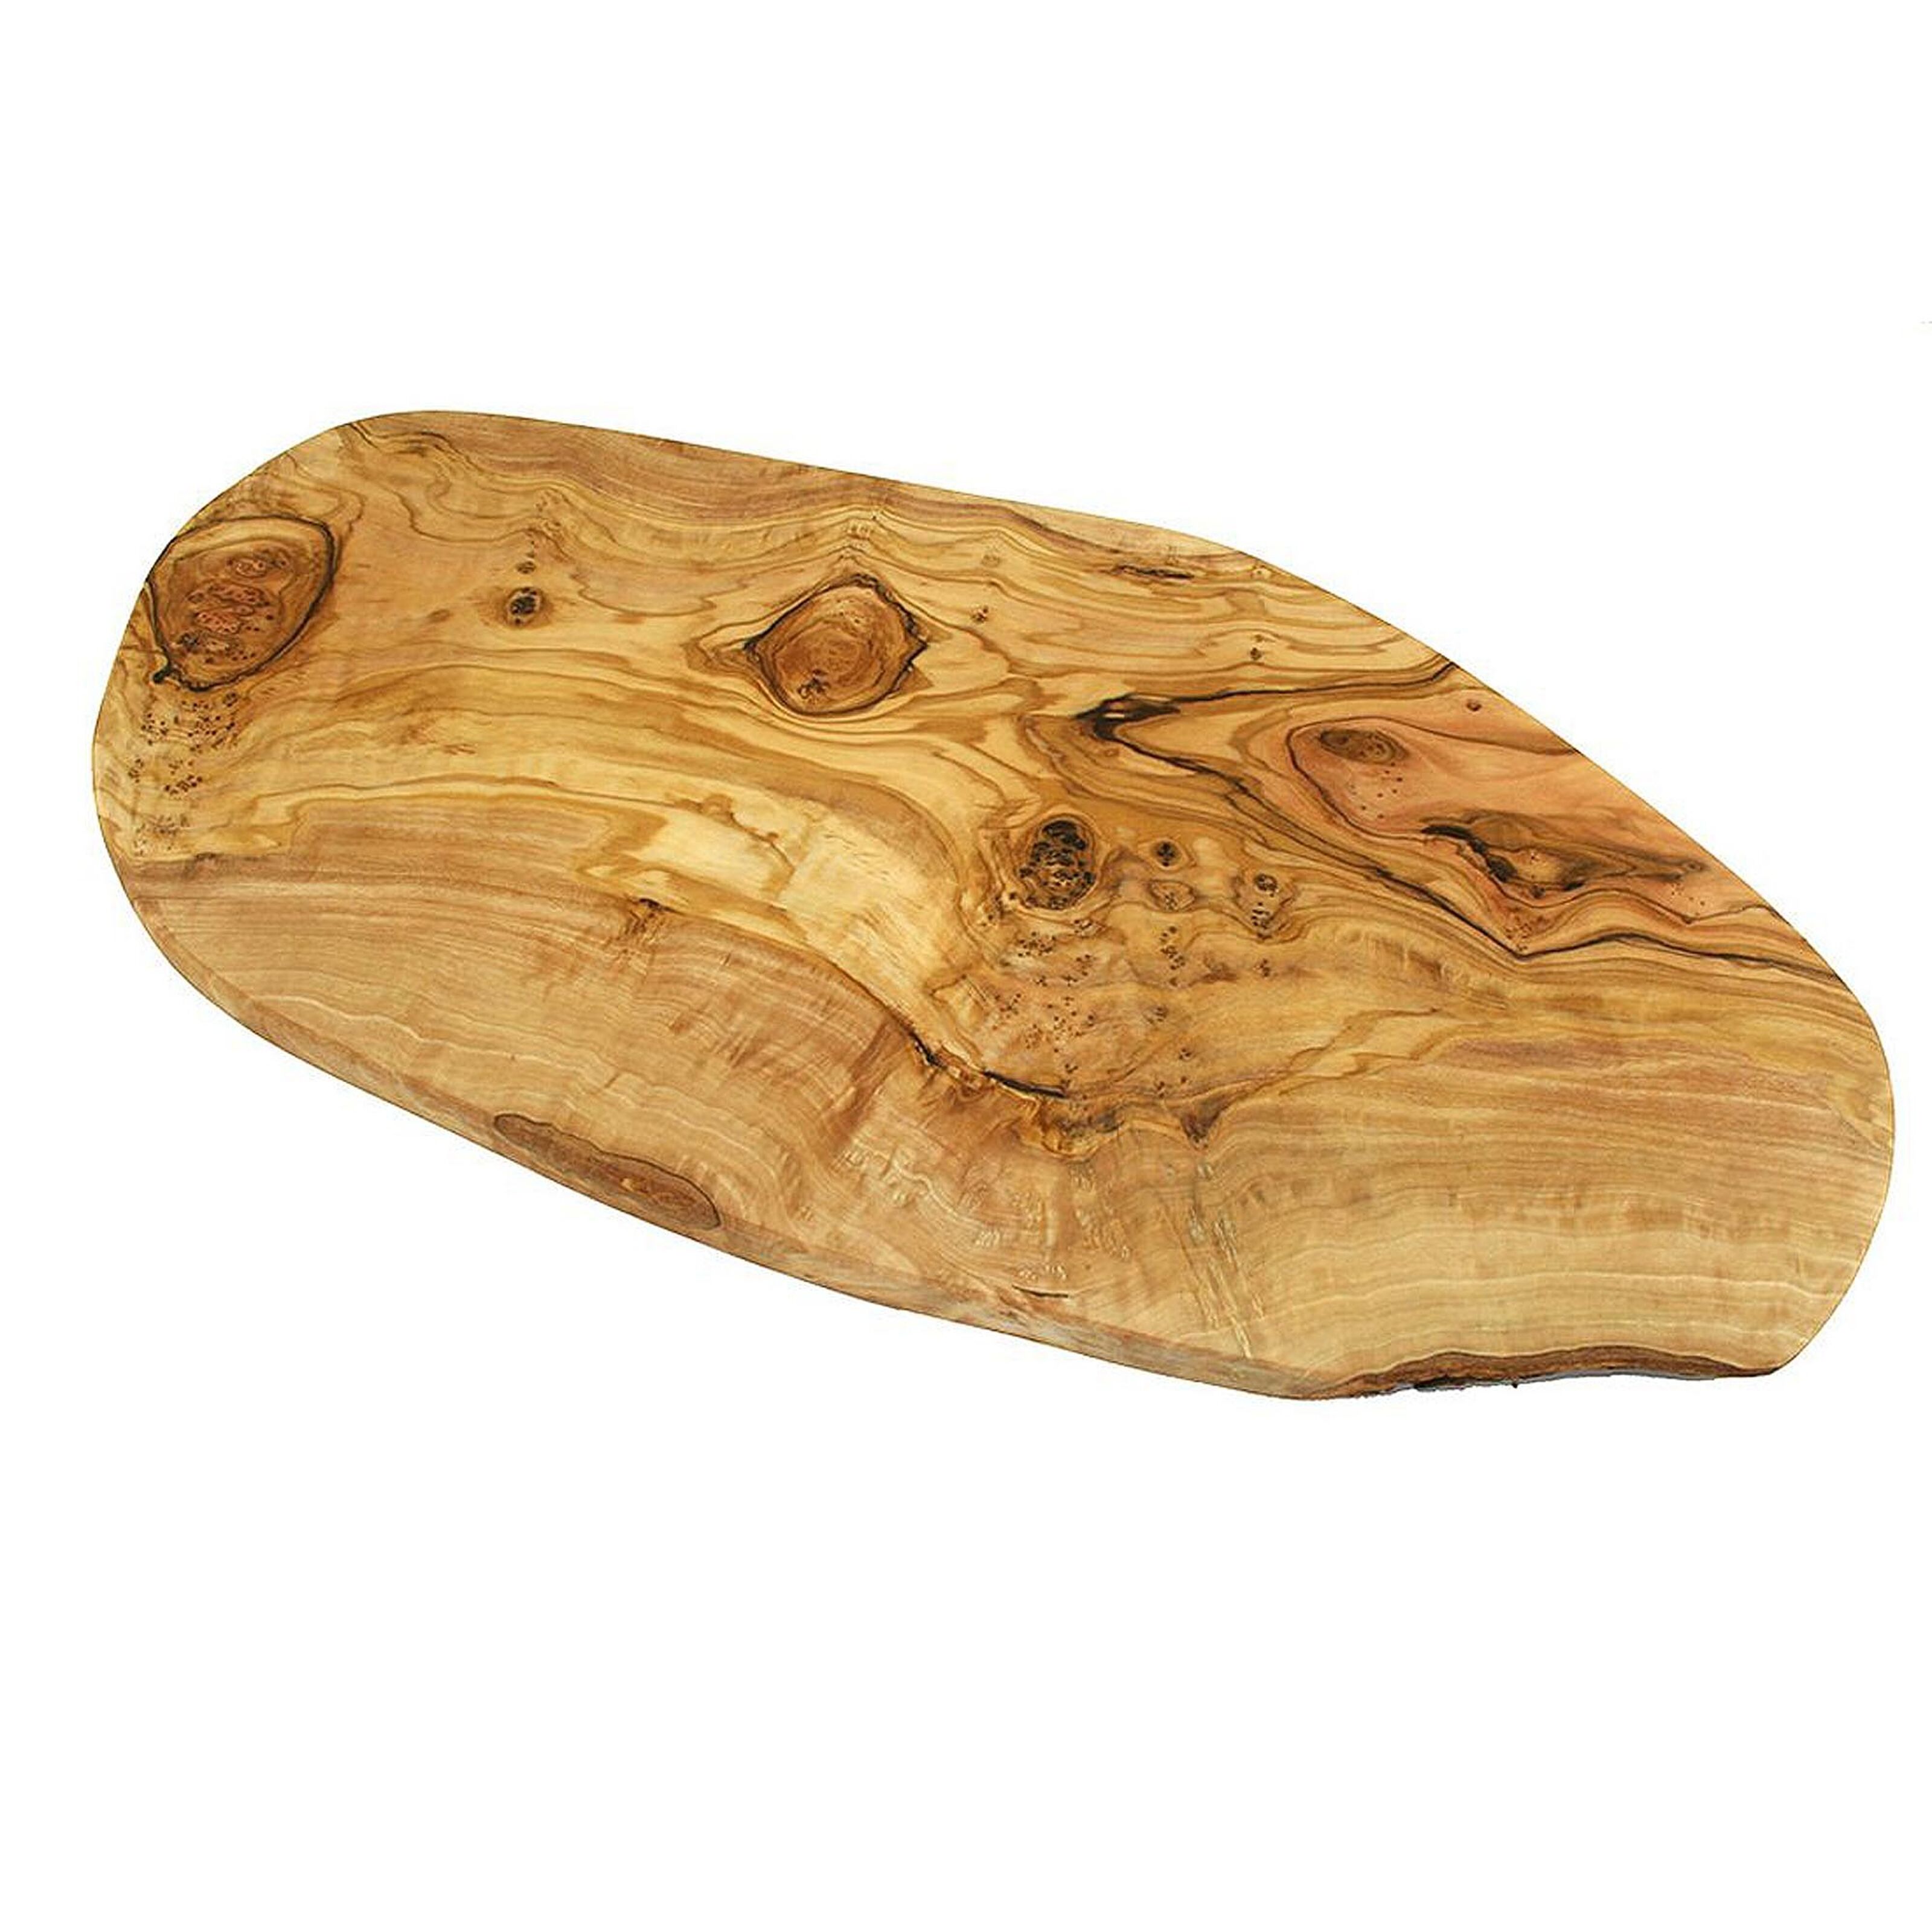 Buy wholesale RUSTIC cutting or 25 approx. (length: board olive cm), - wood serving 29